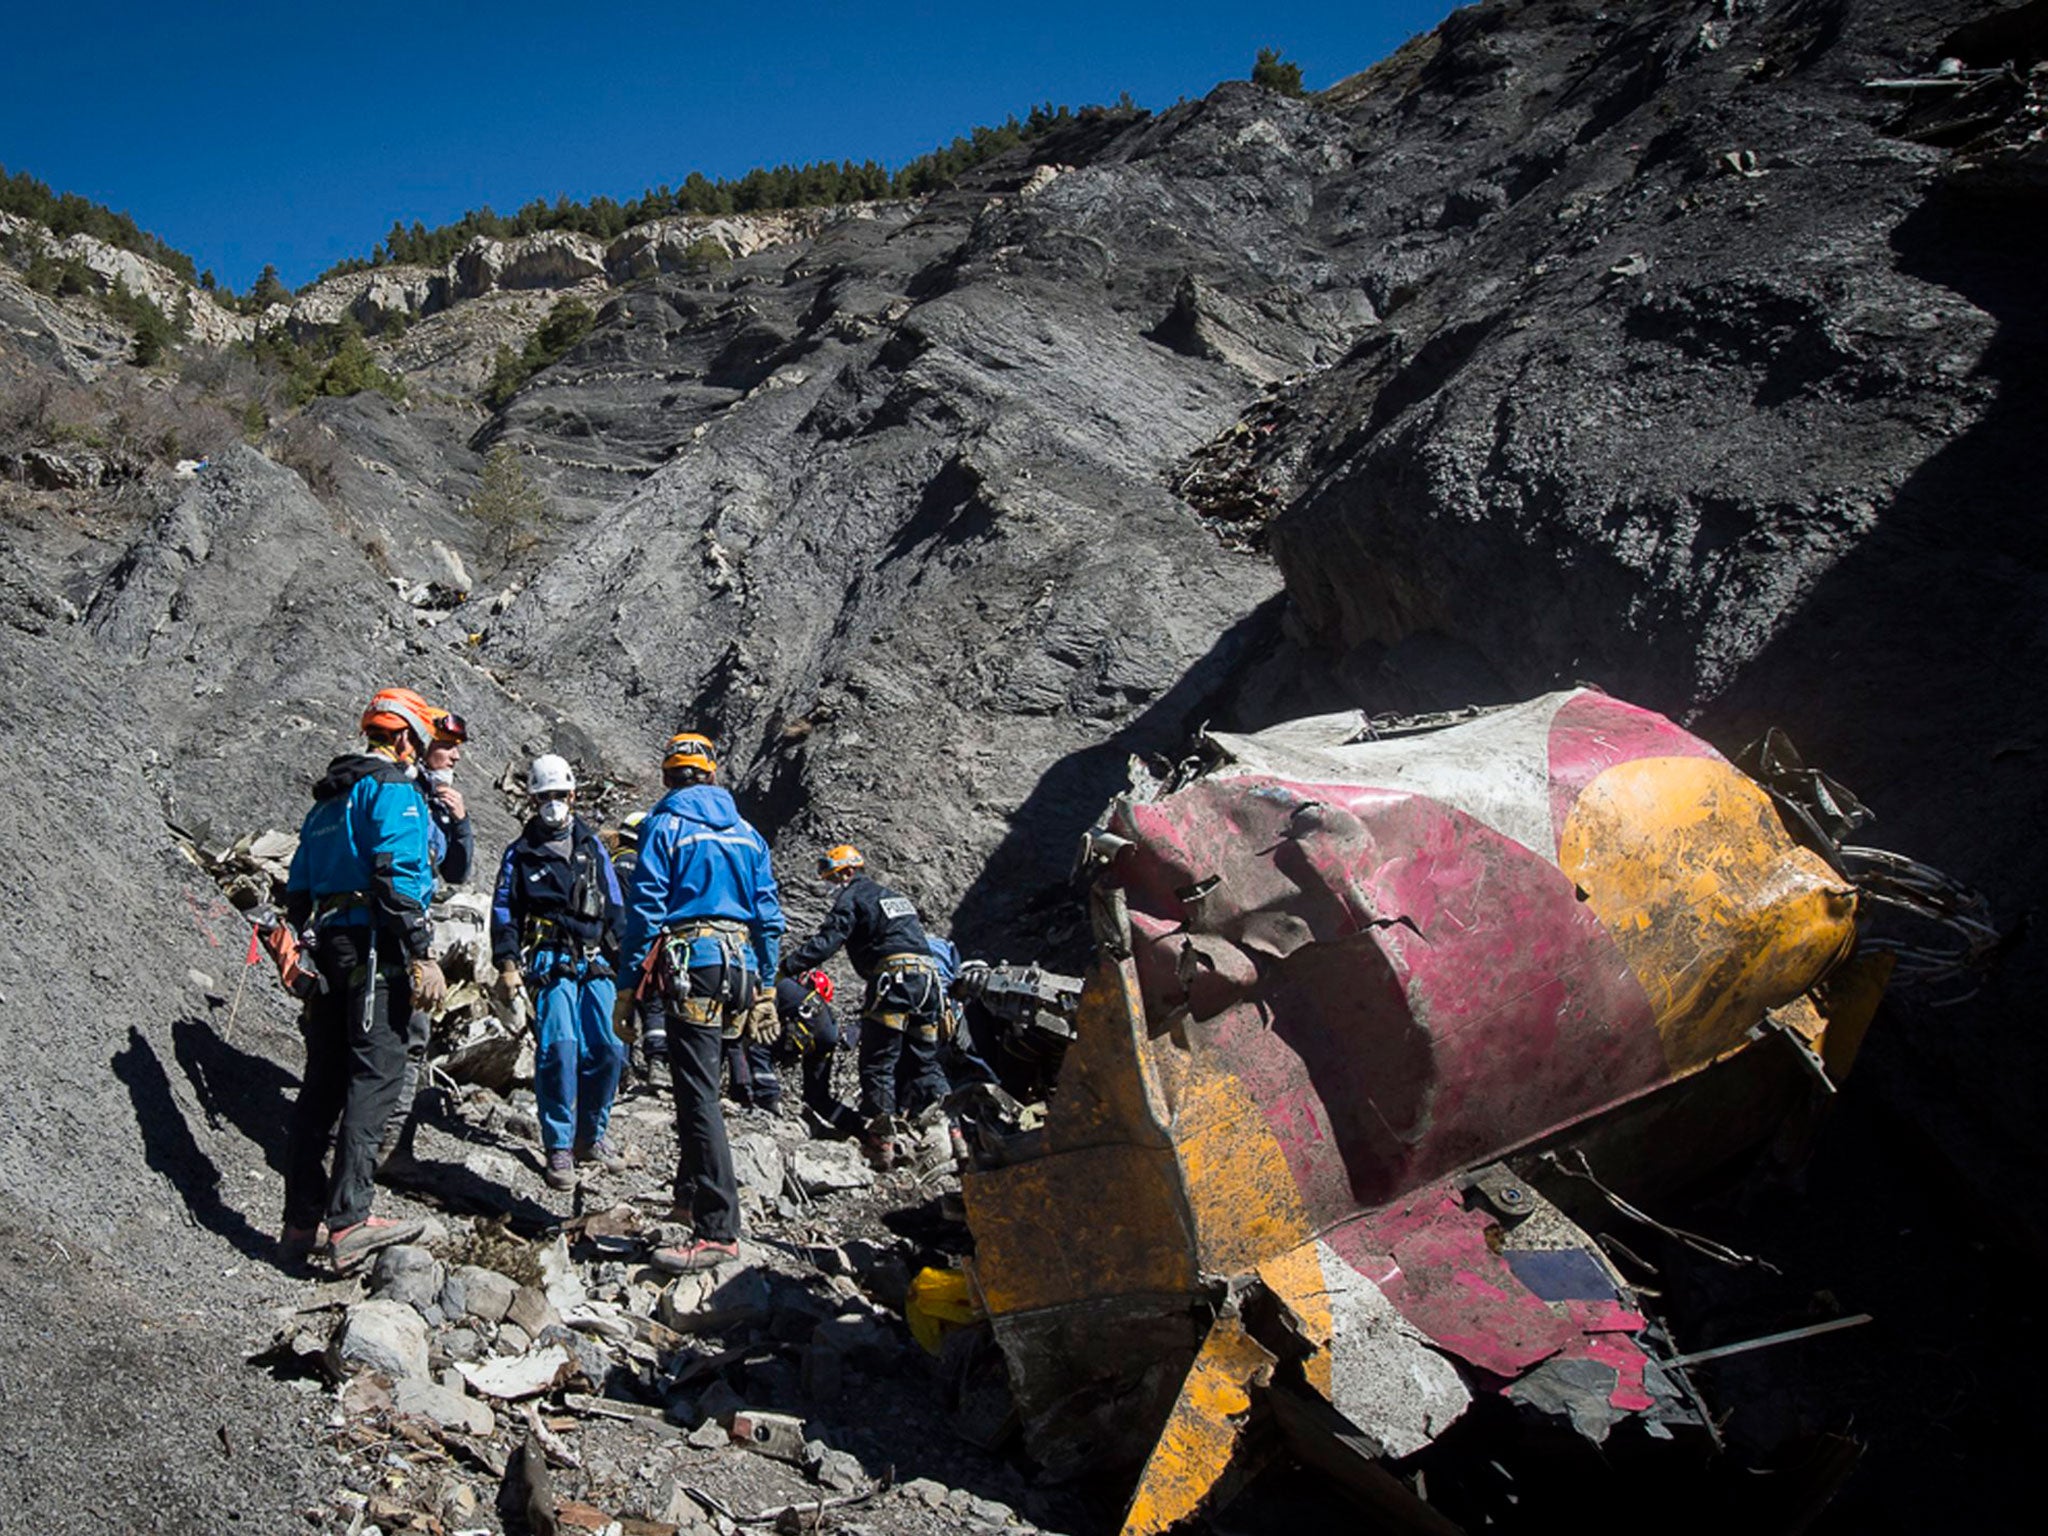 Rescue workers and investigators collect debris at the crash site of the Germanwings Airbus A320, near Seyne-les-Alpes